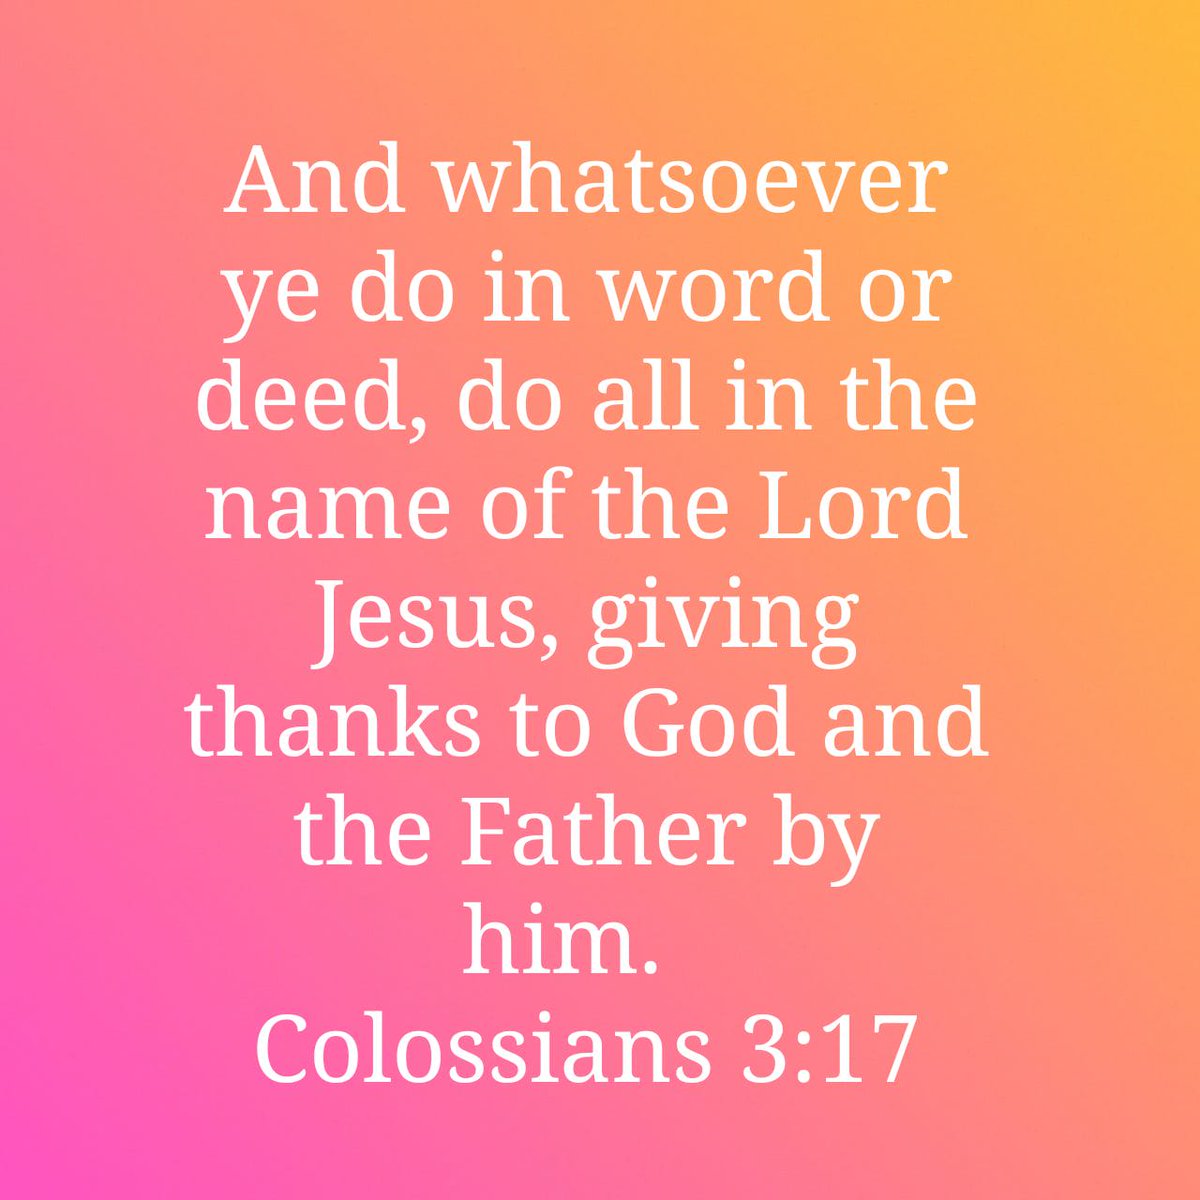 And whatsoever ye do in word or deed, do all in the name of the Lord Jesus, giving thanks to God and…
https://t.co/saVcoVvcdj #BibleVerses #JesusIsKing #JesusSaves #JesusIsComing https://t.co/UznJIycv8I